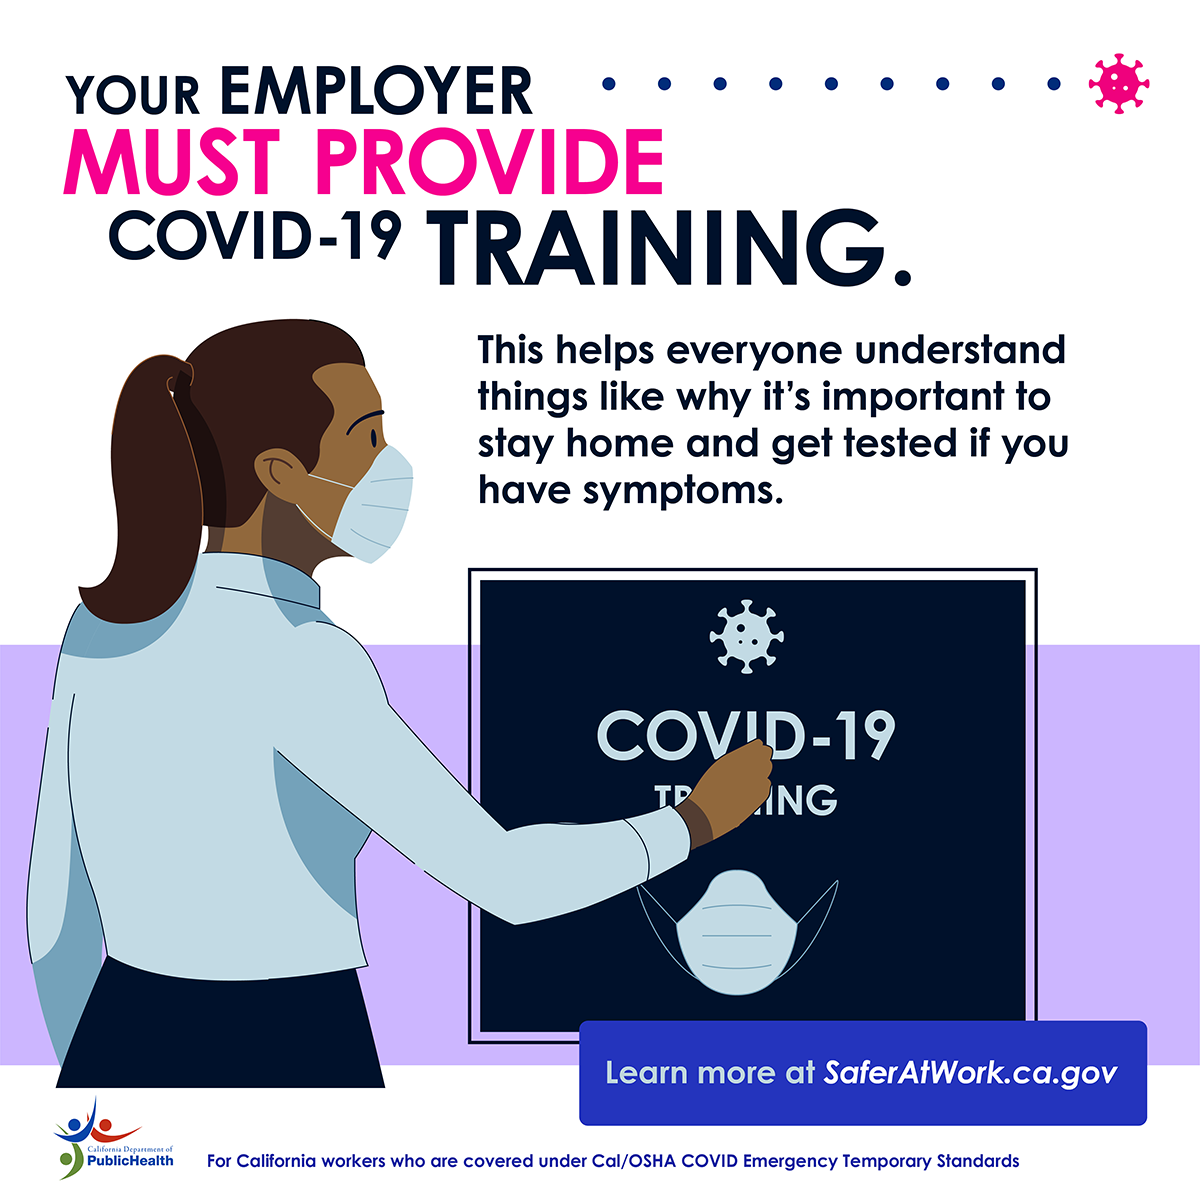 Your employer must provide COVID-19 training. This helps everyone understand things like why it's important to stay home and get tested if you have symptoms.